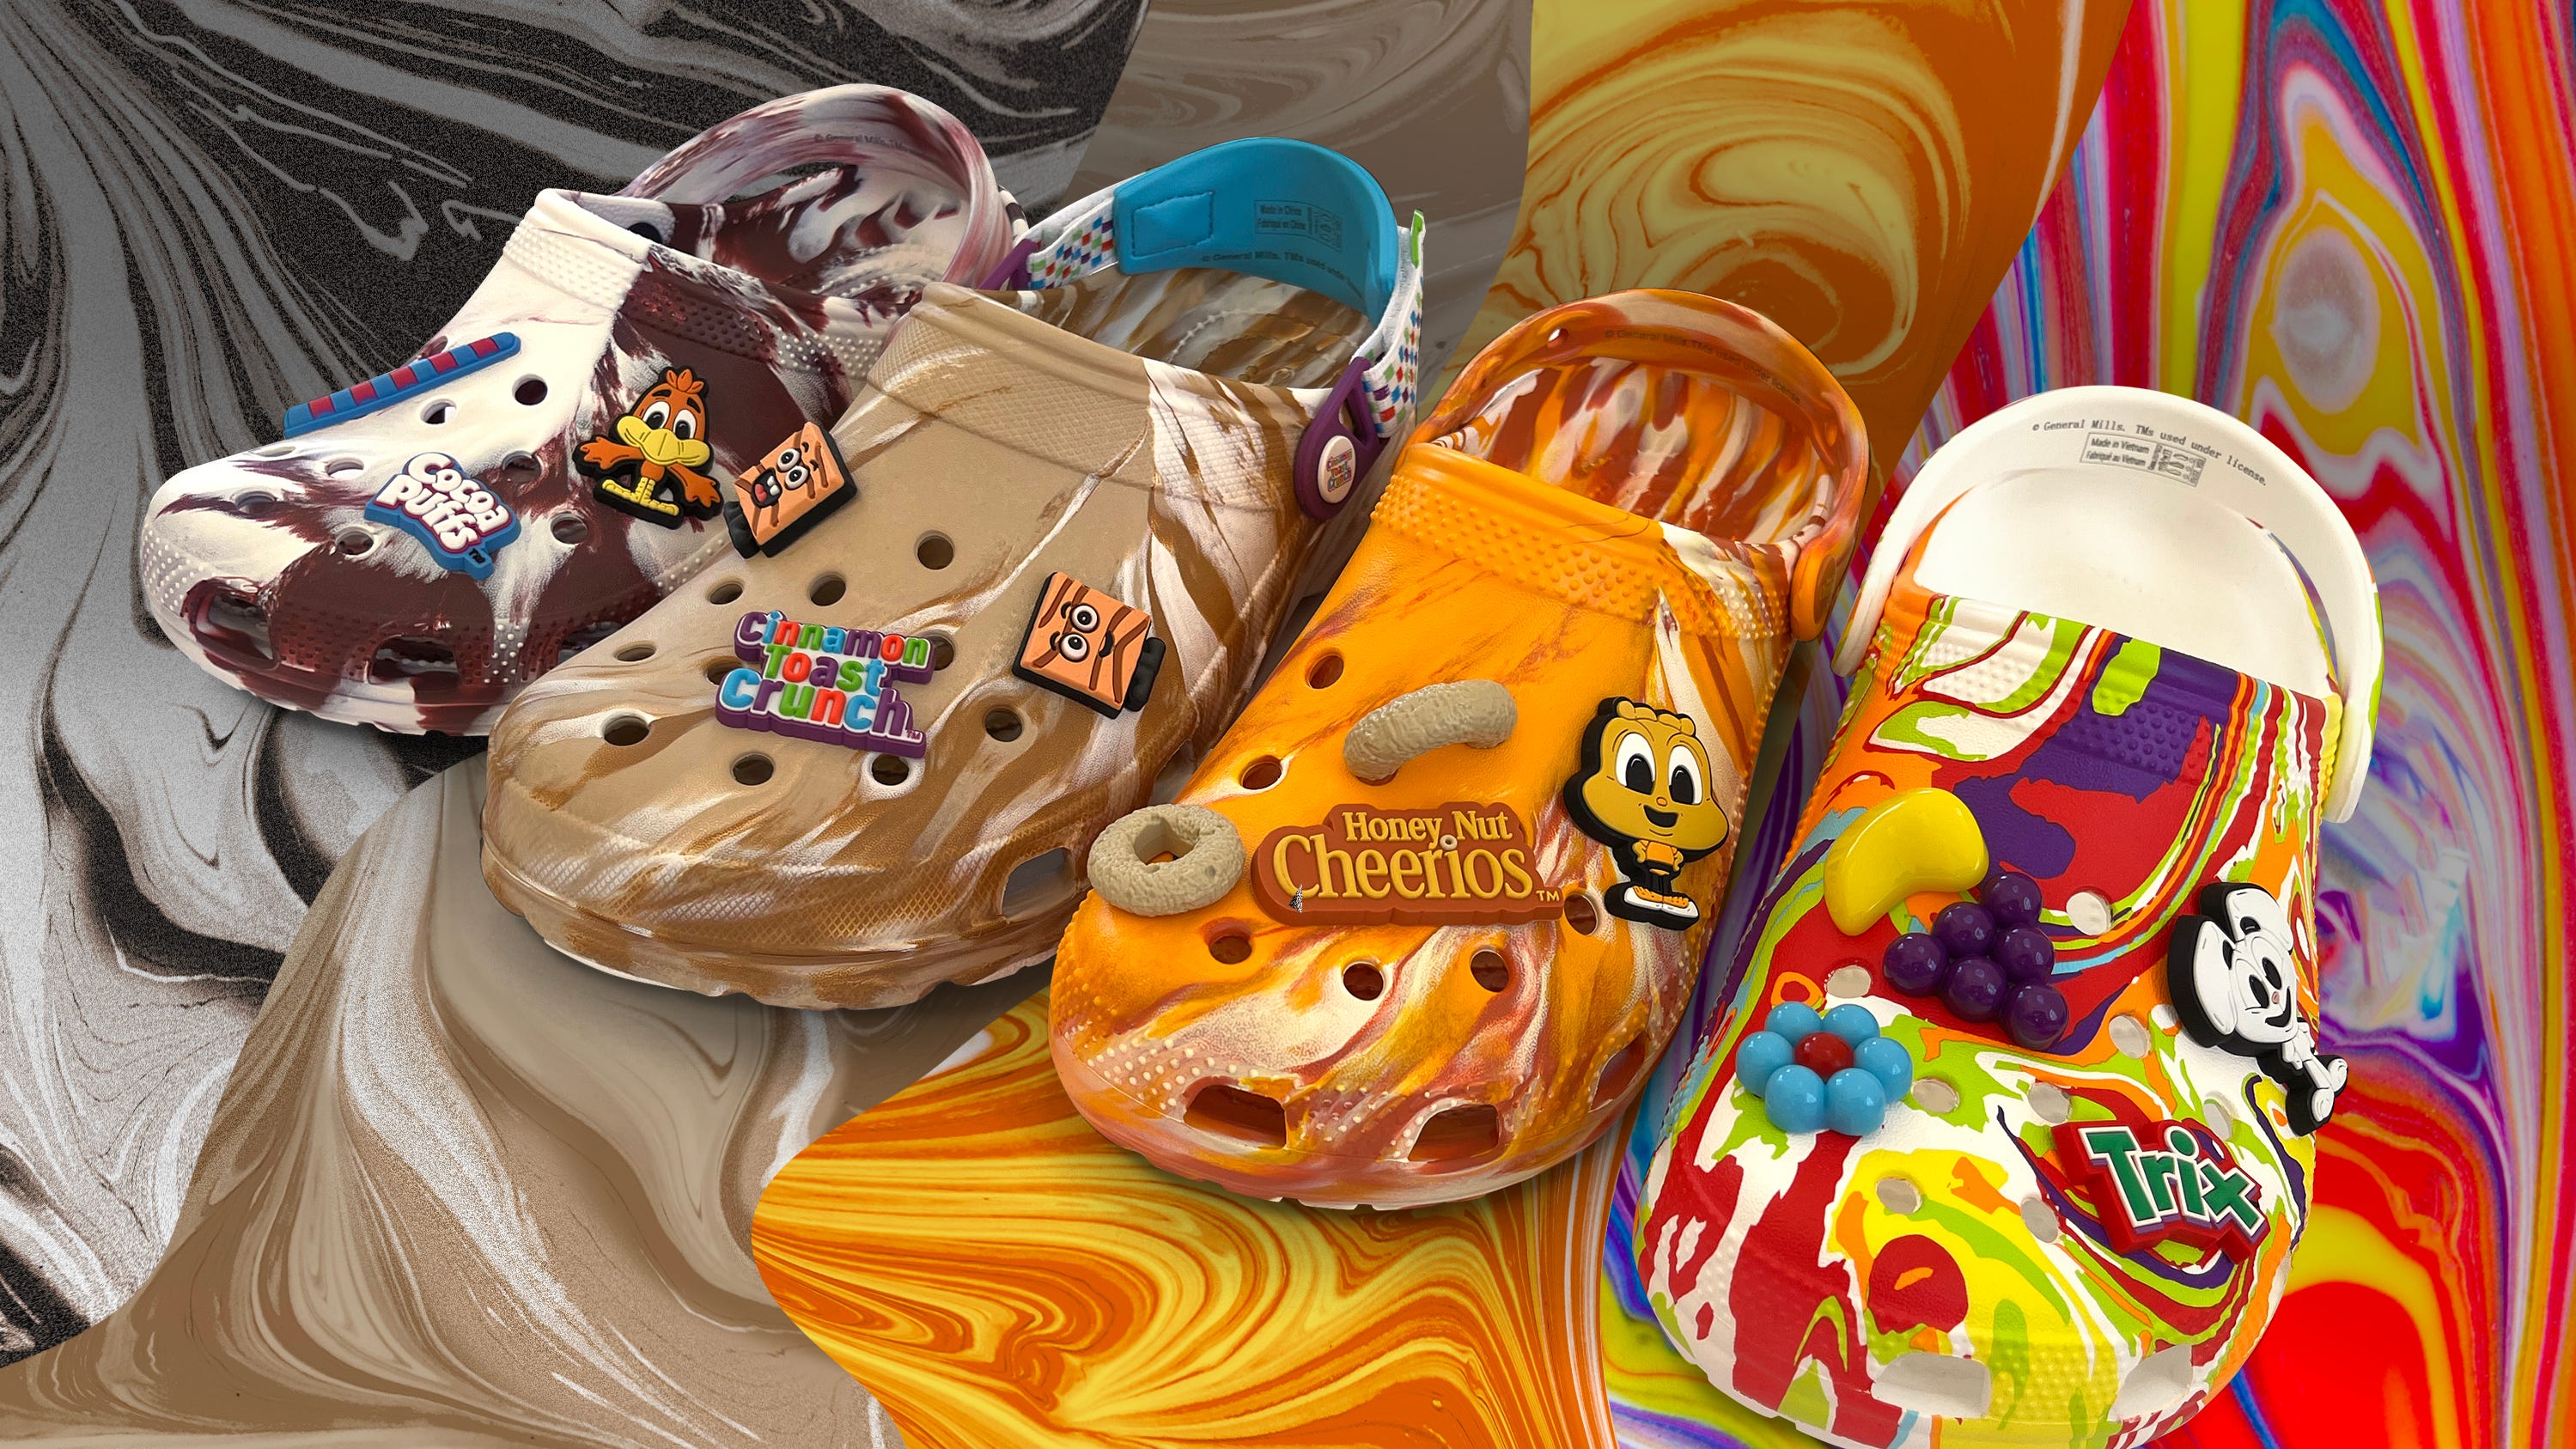 Cereal-inspired Crocs have hit shelves. Here's how to get some.